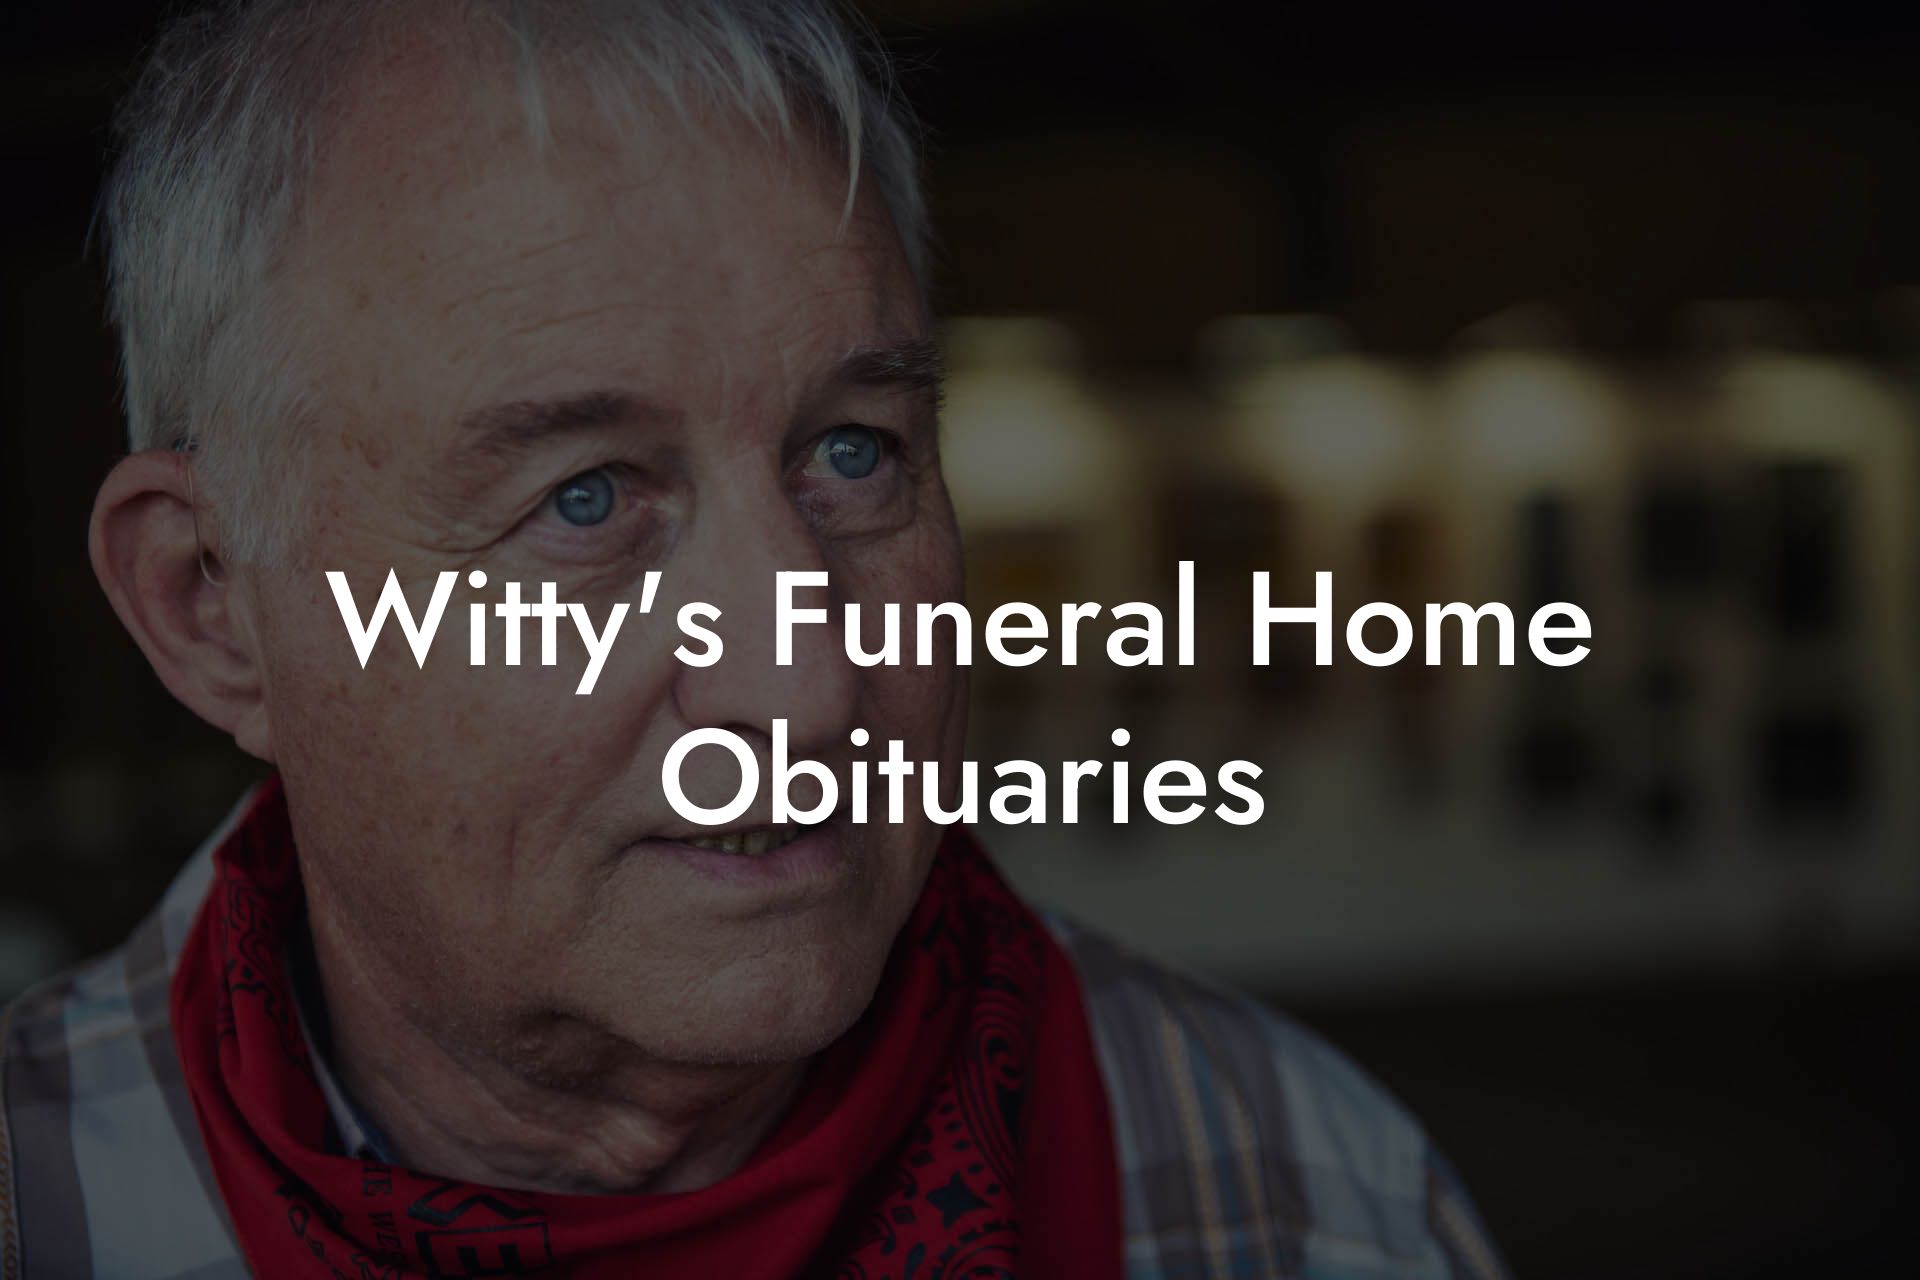 Witty's Funeral Home Obituaries